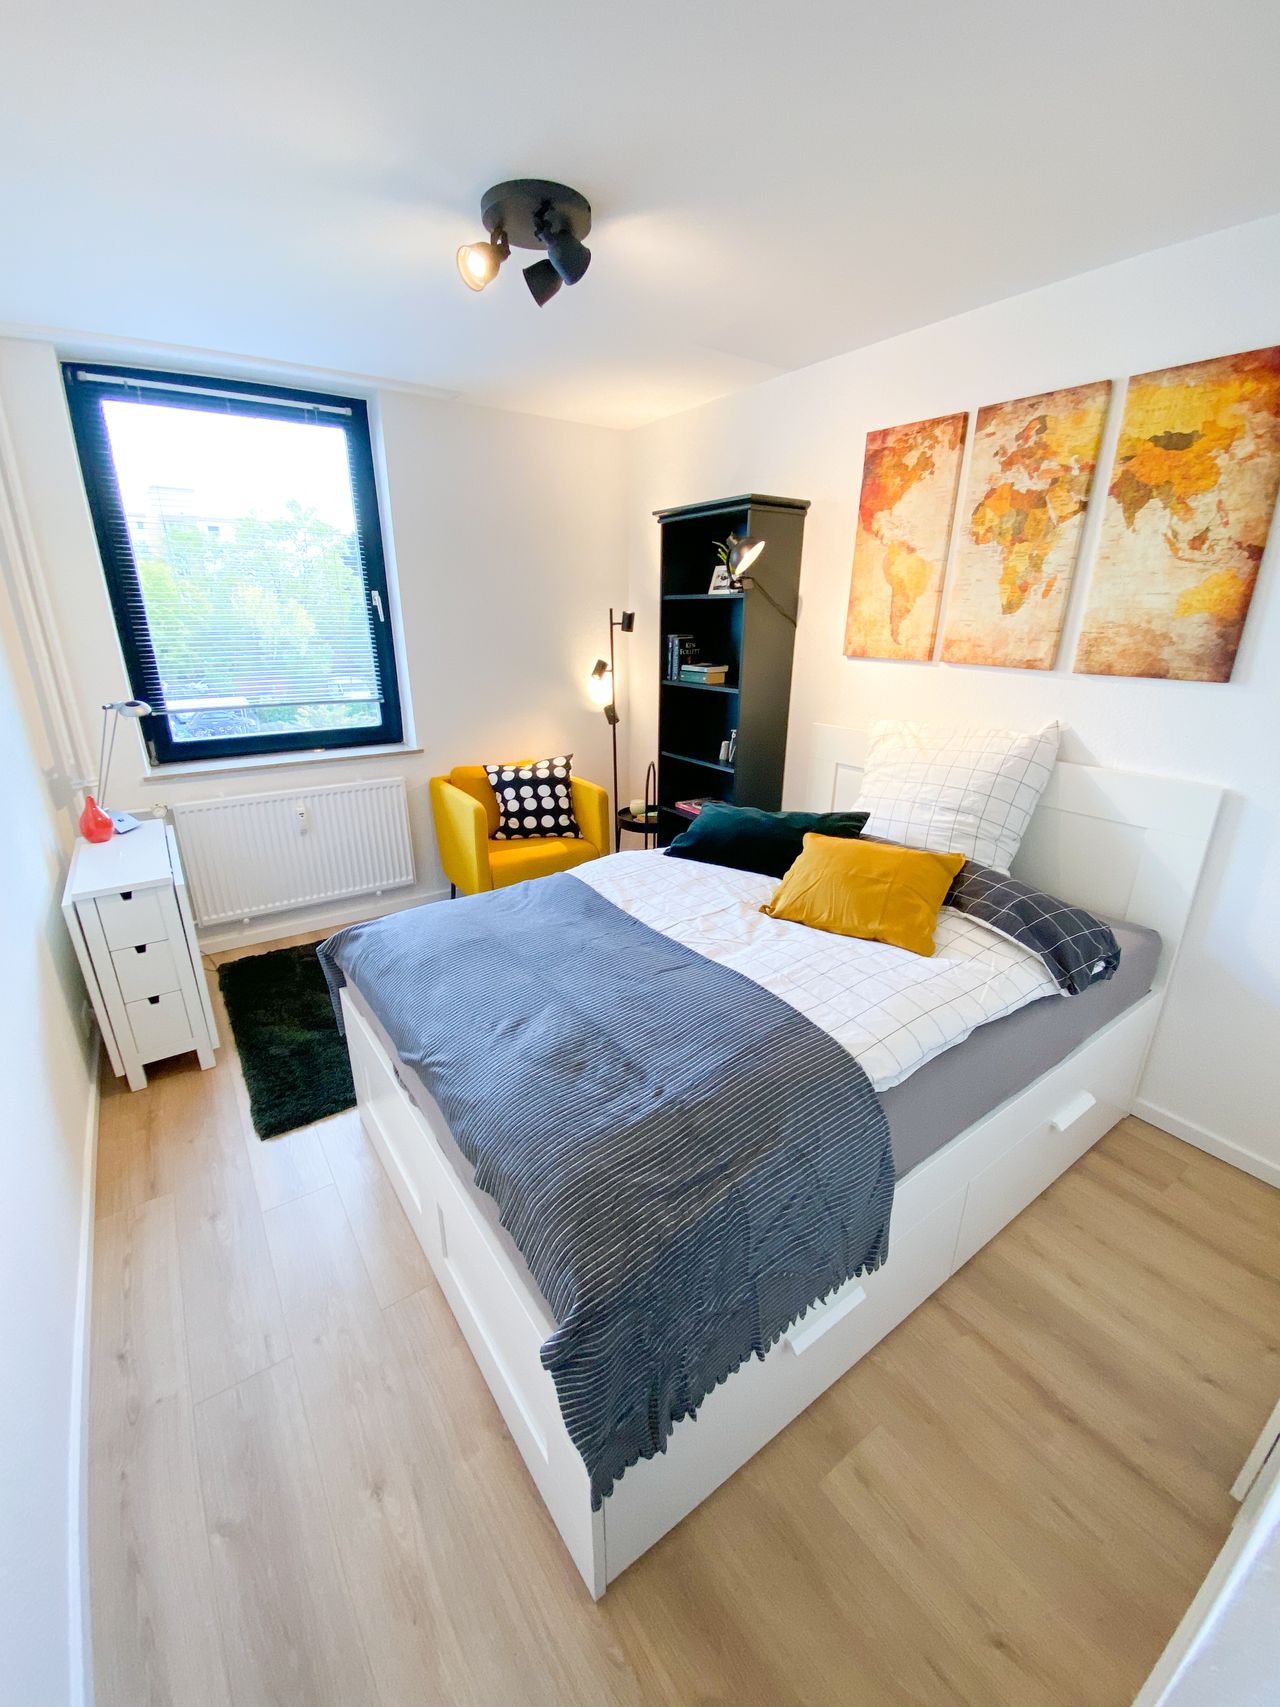 Newly renovated and furnished cozy apartment in Mainz